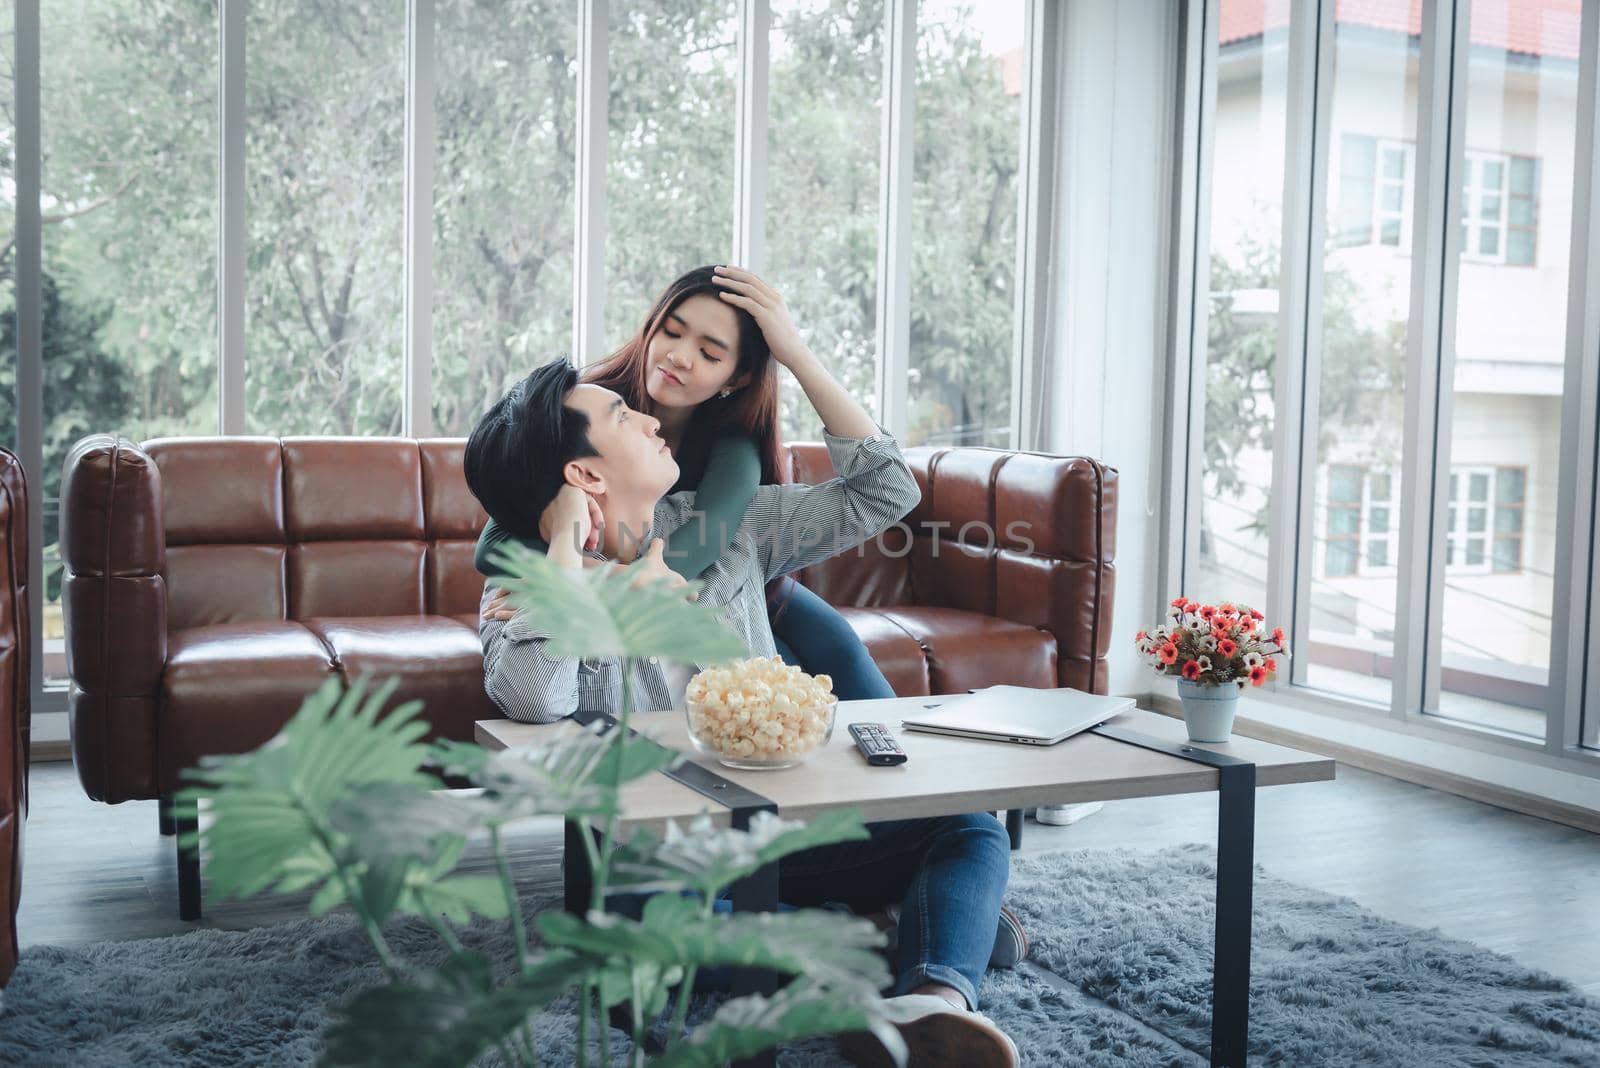 Couple Love Having Coronavirus Covid-19 Quarantine at Home, Portrait of Asian Couple Enjoying in Living Room Together During Quarantined Covid19 at Their House. Couple Relationship Leisure Lifestyle